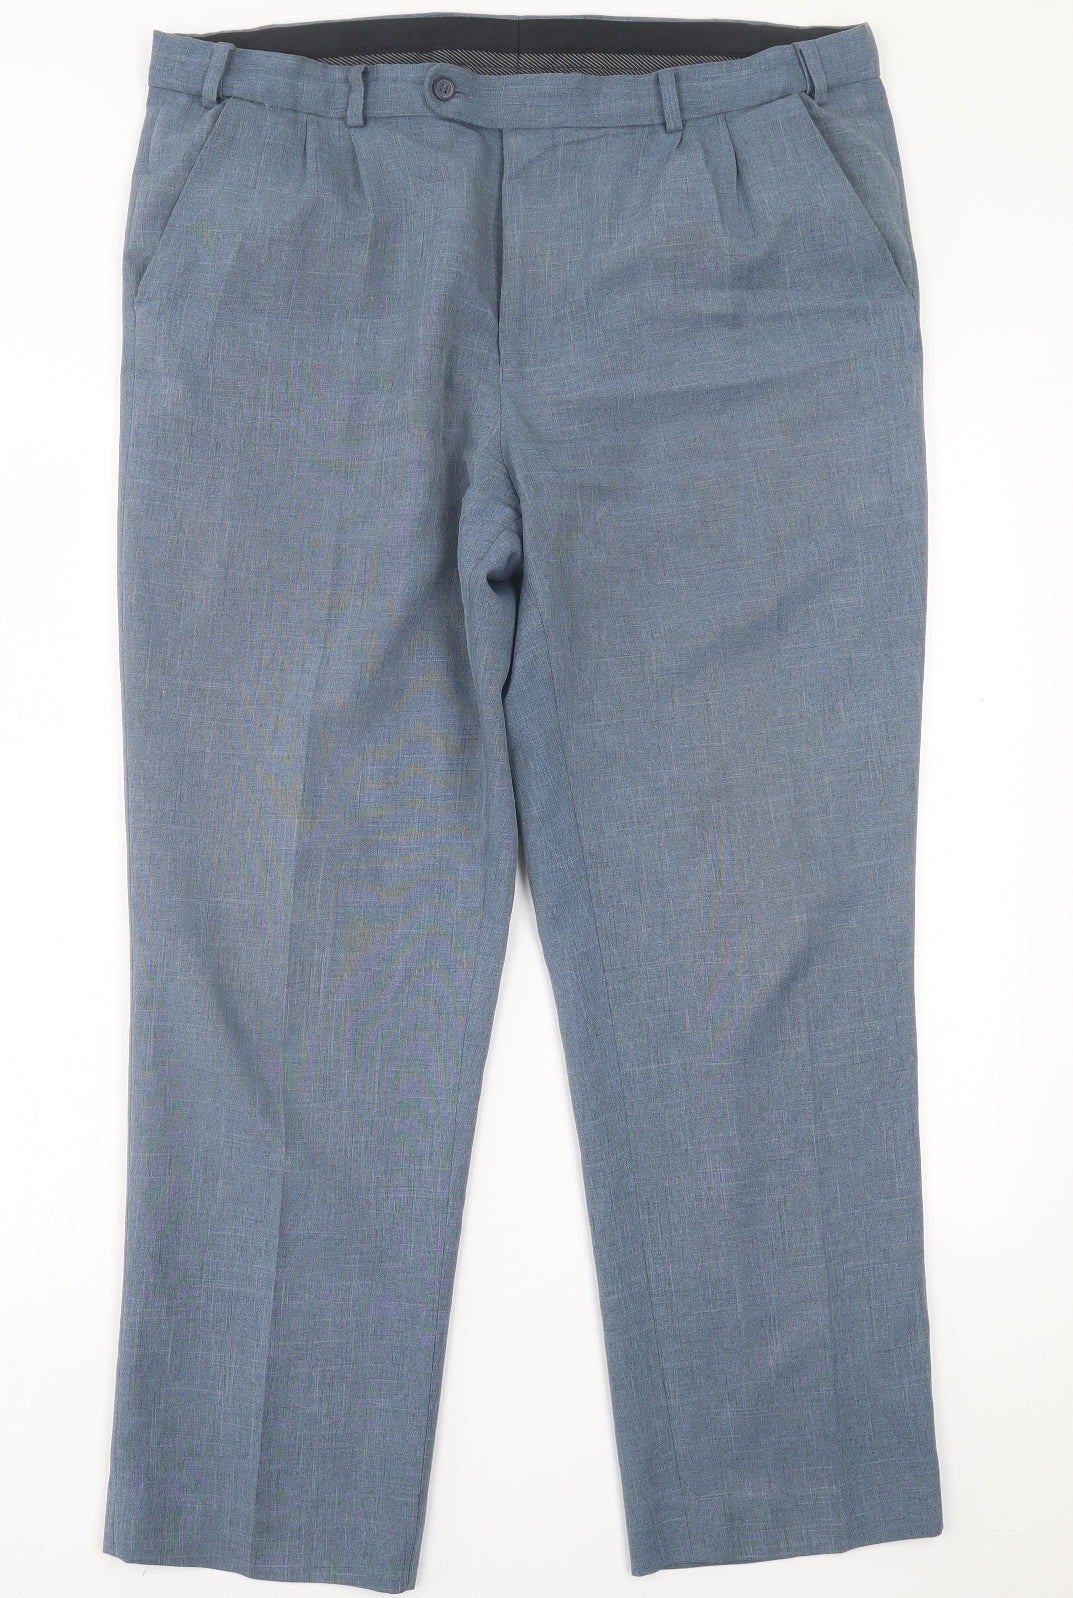 Matalan Mens Blue  Polyester Trousers  Size 36 in L29 in Regular Button